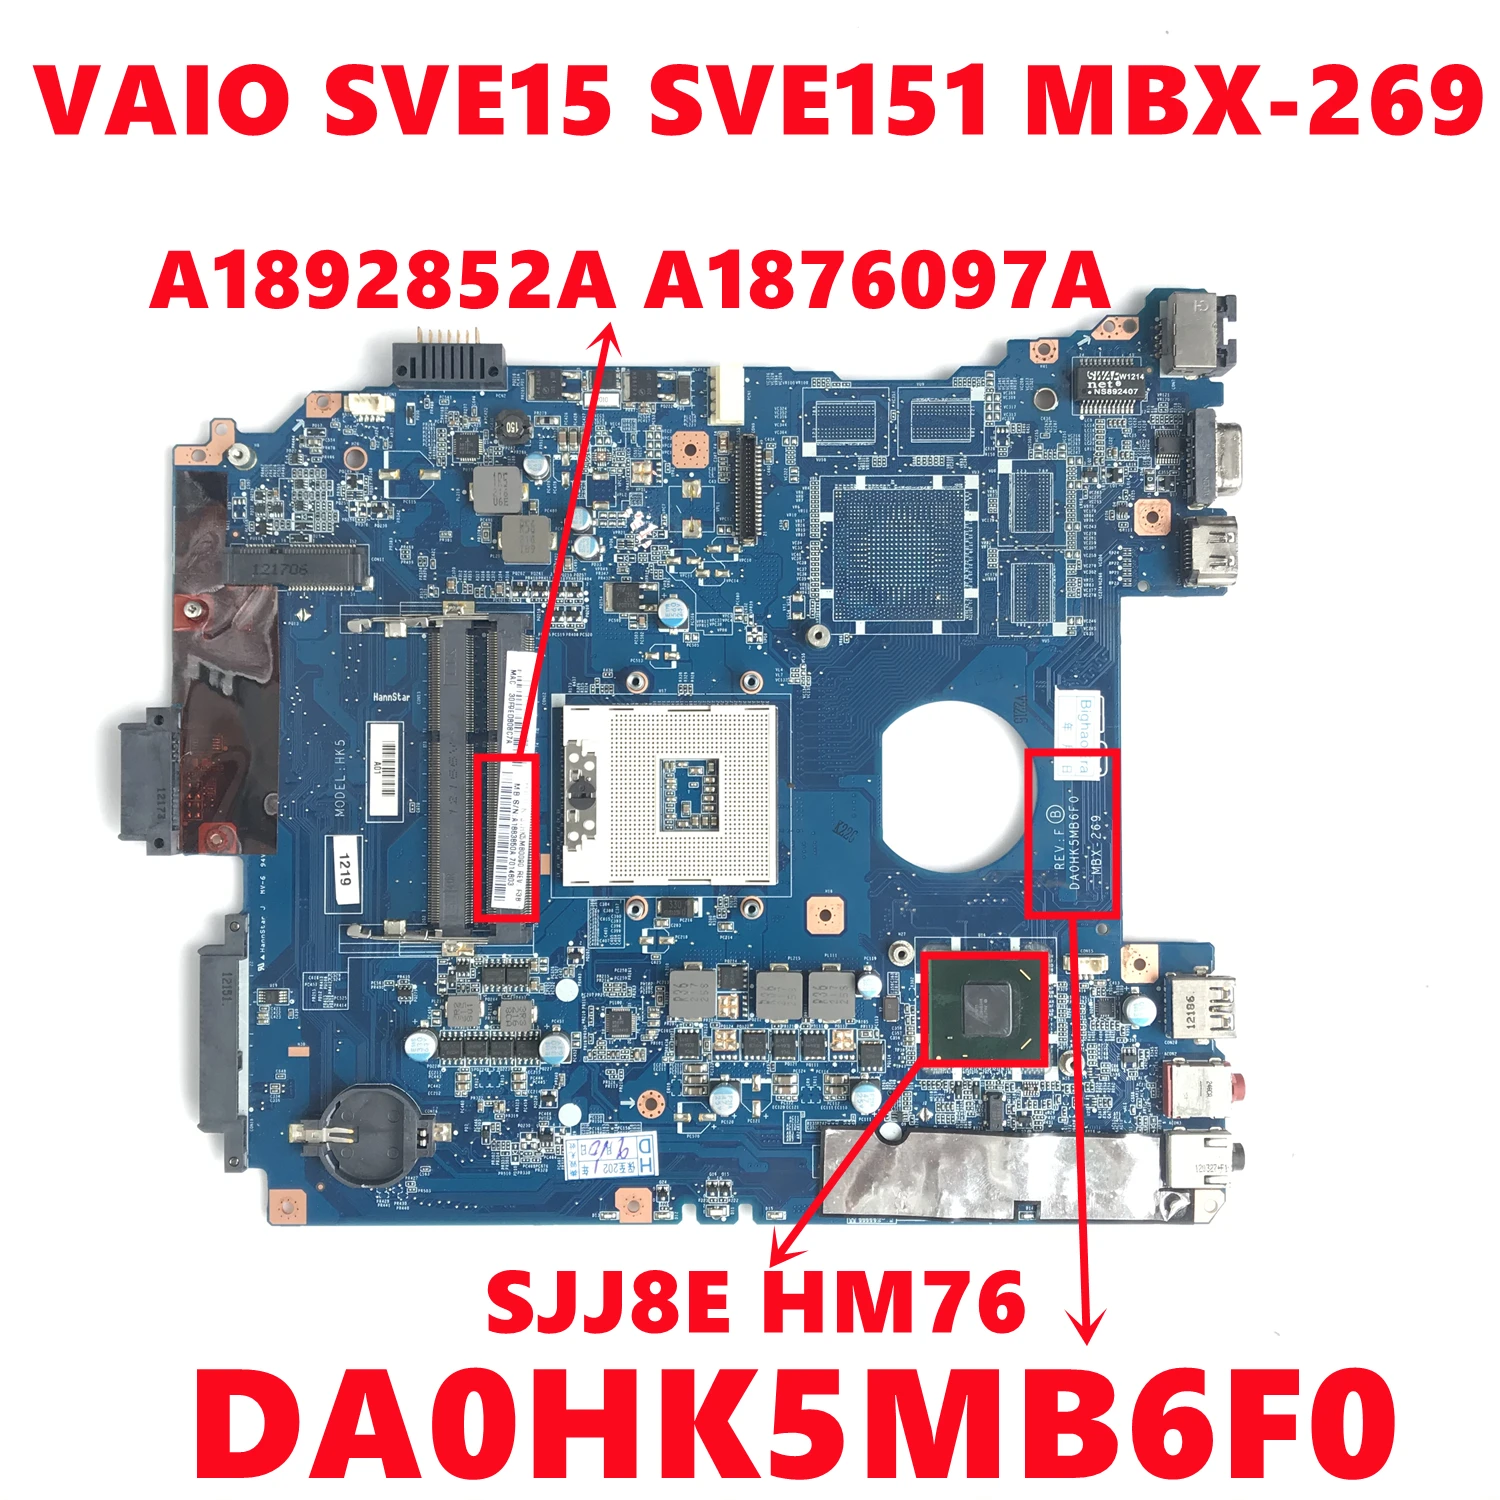 

A1892852A A1876097A Mainboard For Sony VAIO SVE15 SVE151 MBX-269 Laptop Motherboard DA0HK5MB6F0 SJJ8E HM76 100% Tested Working